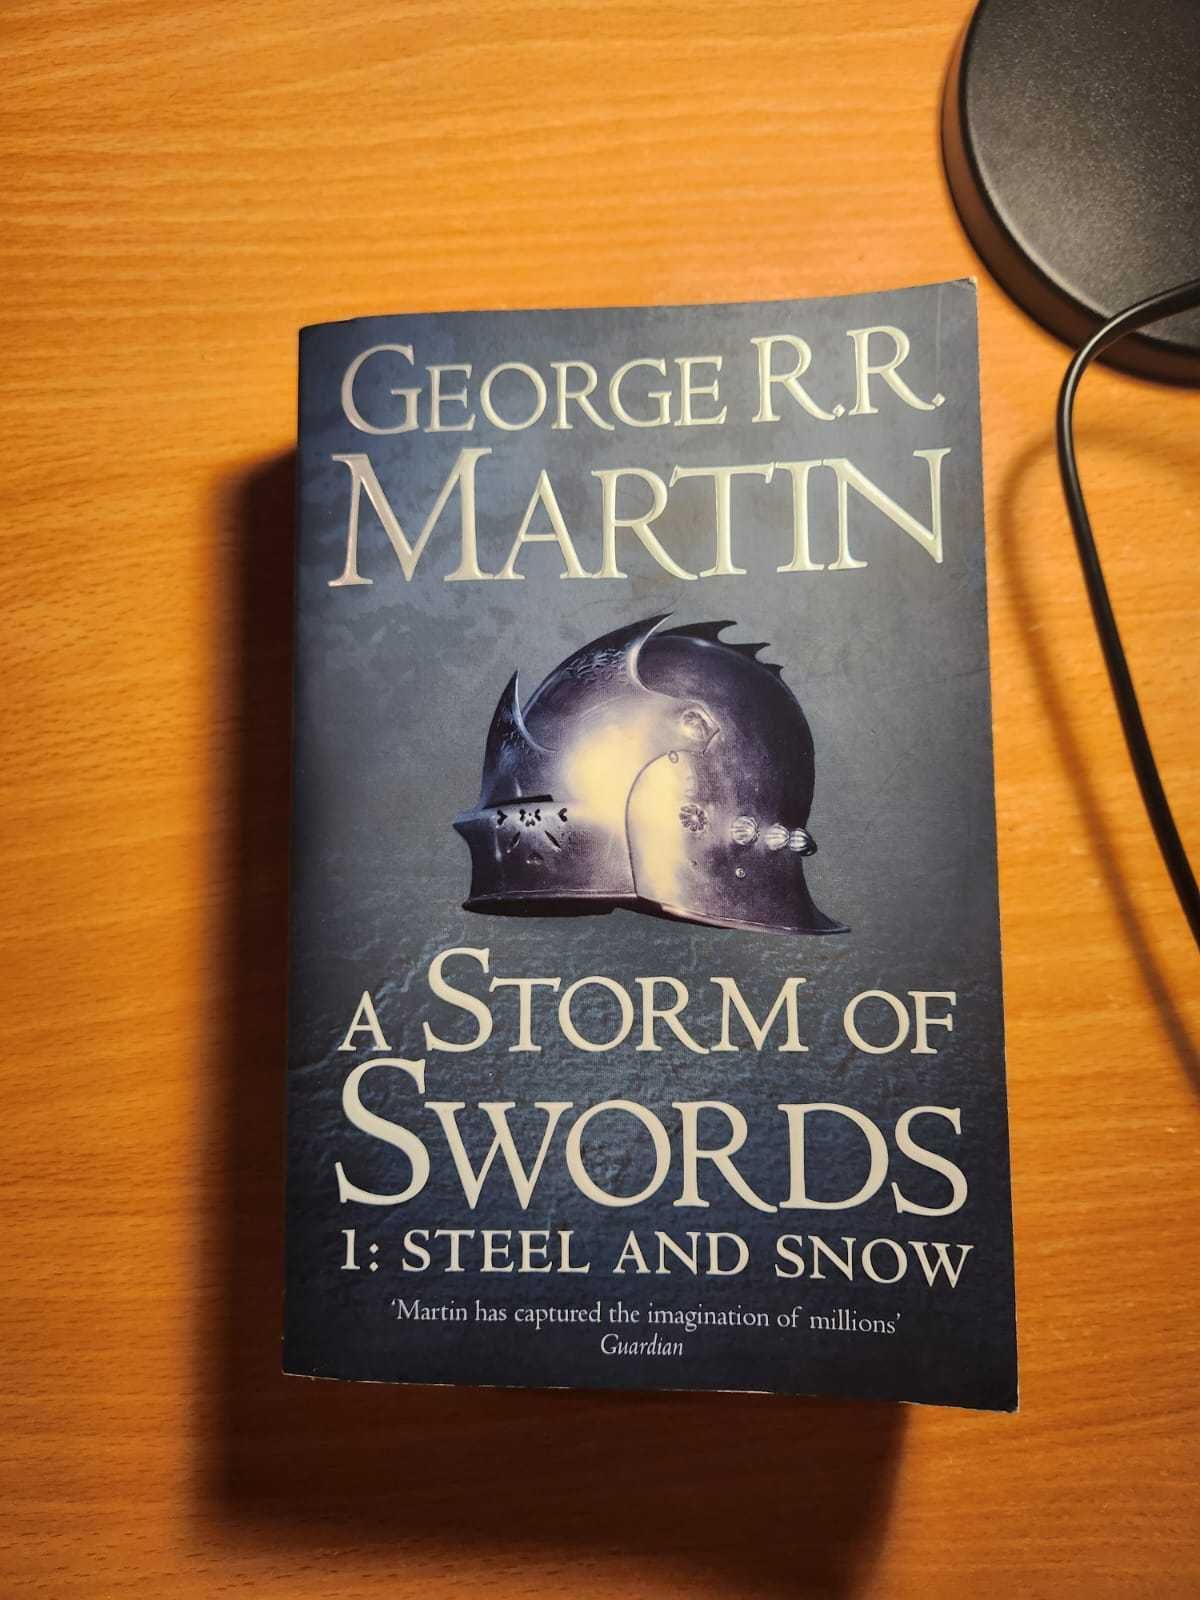 George RR Martin - A Storm of Swords 1:Steel and Snow